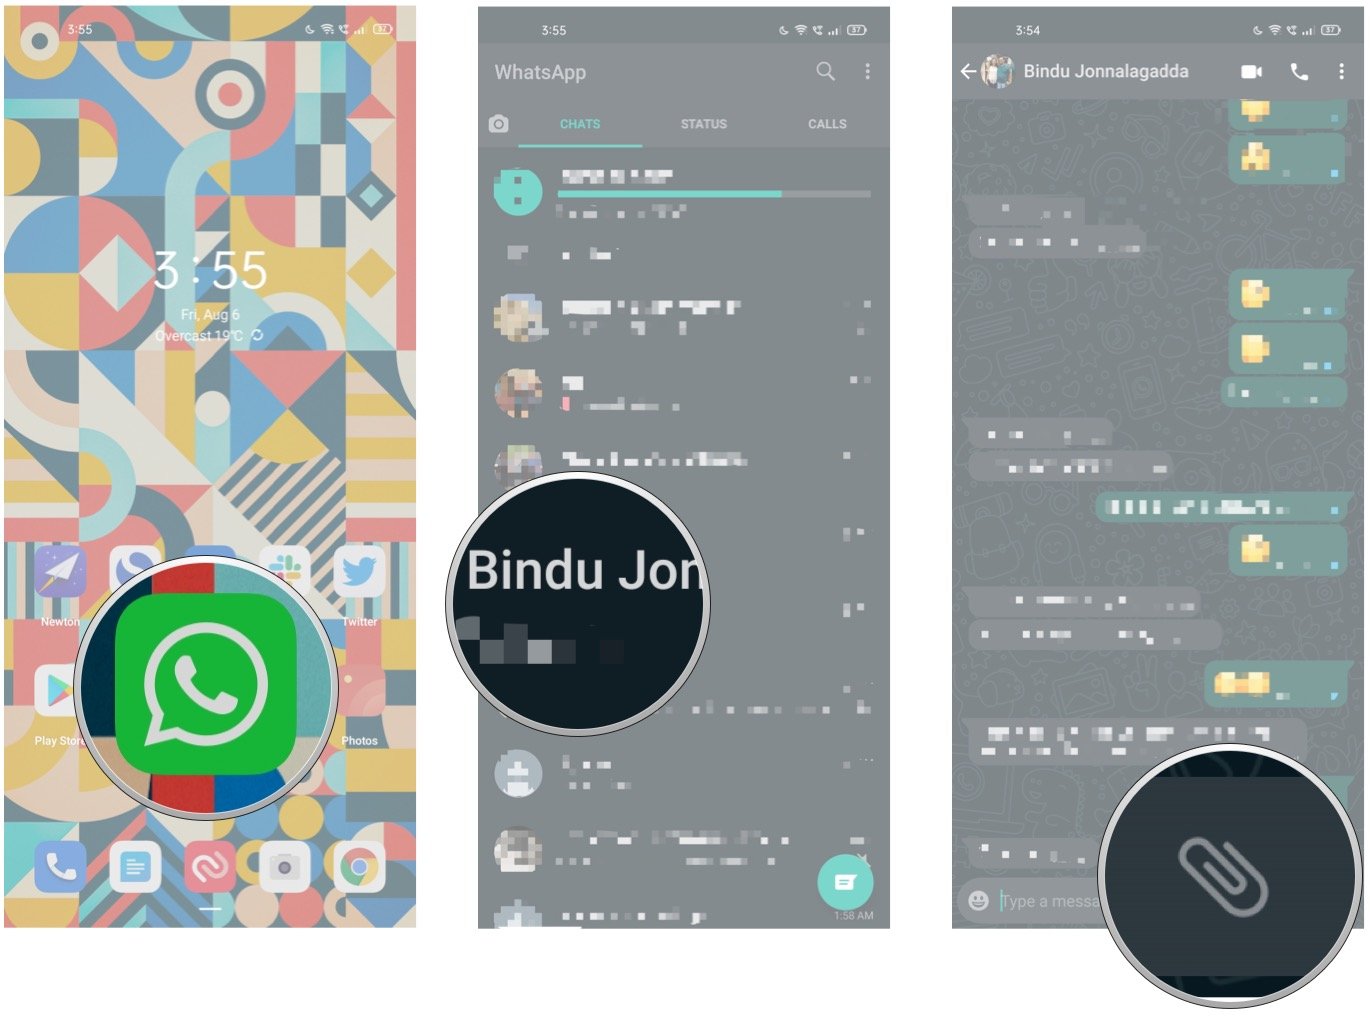 How to send 'View Once' photos in WhatsApp